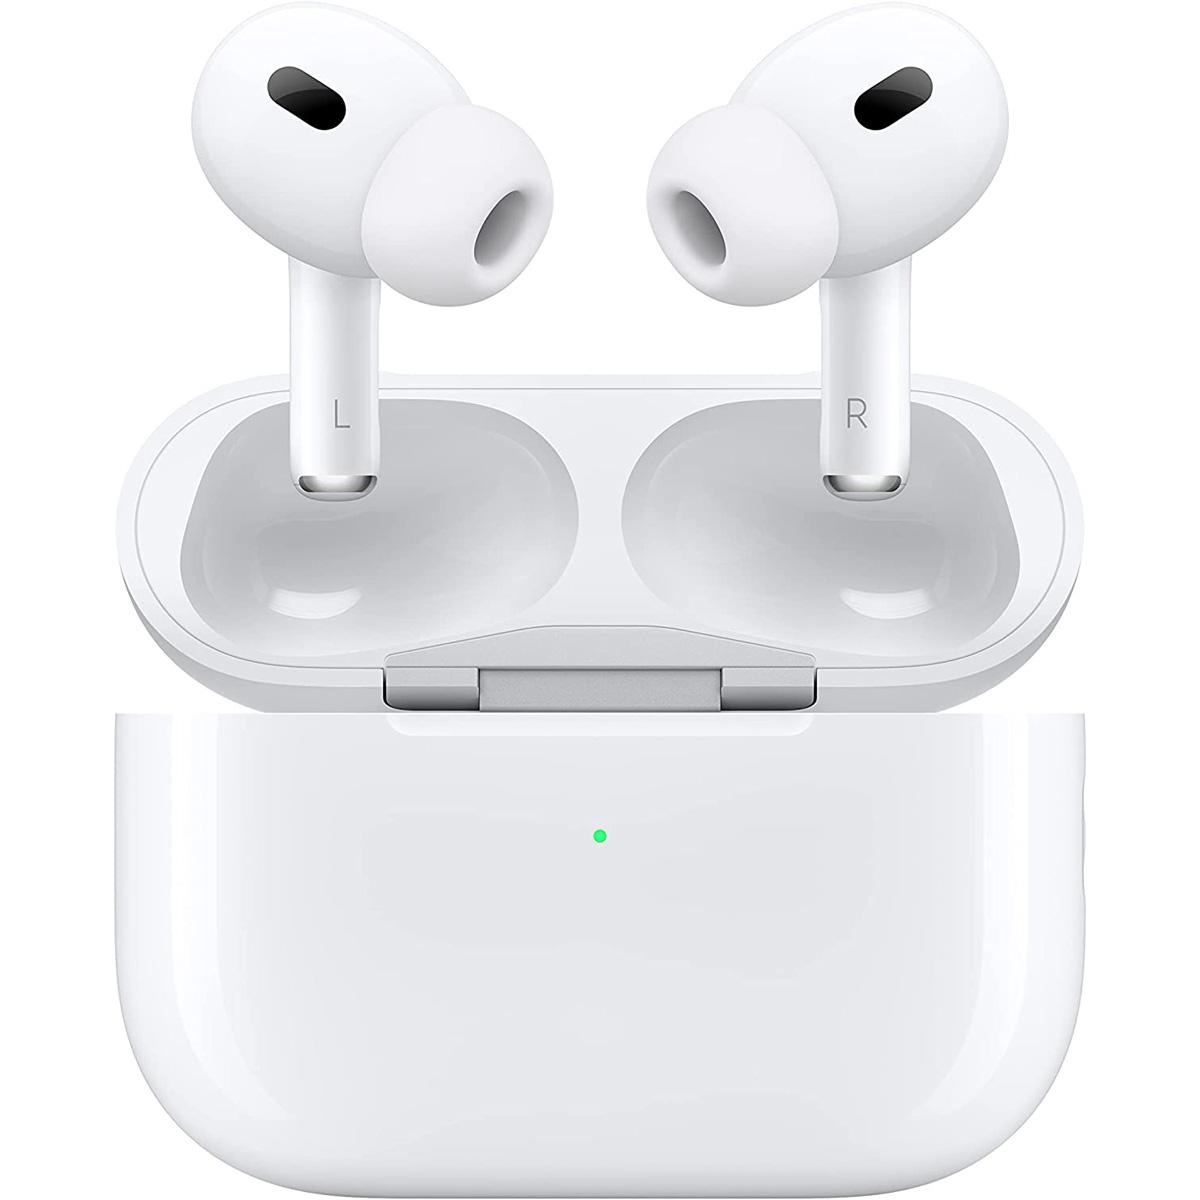 Apple AirPods Pro Wireless Earbuds 2nd Generation for $239.99 Shipped